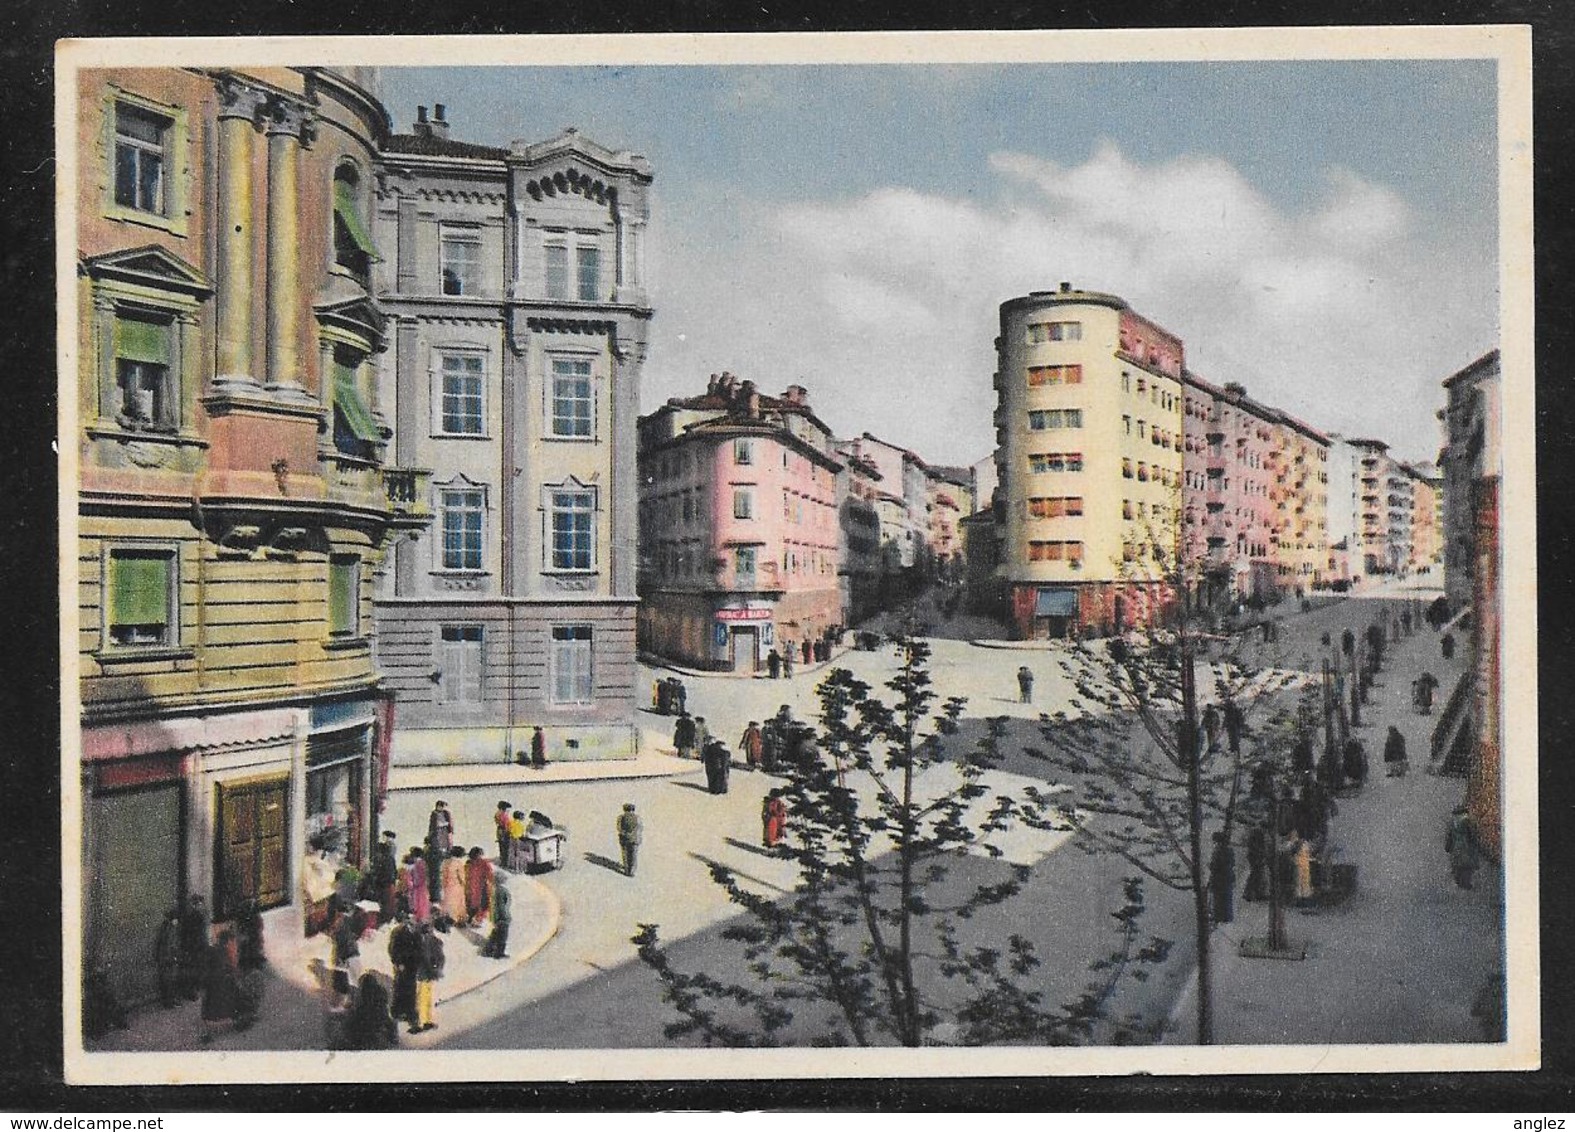 ITALY - TRIESTE - VIALE SIDNEY SONNINO - COLOUR VIEW C.1940's - UNPOSTED - Trieste (Triest)